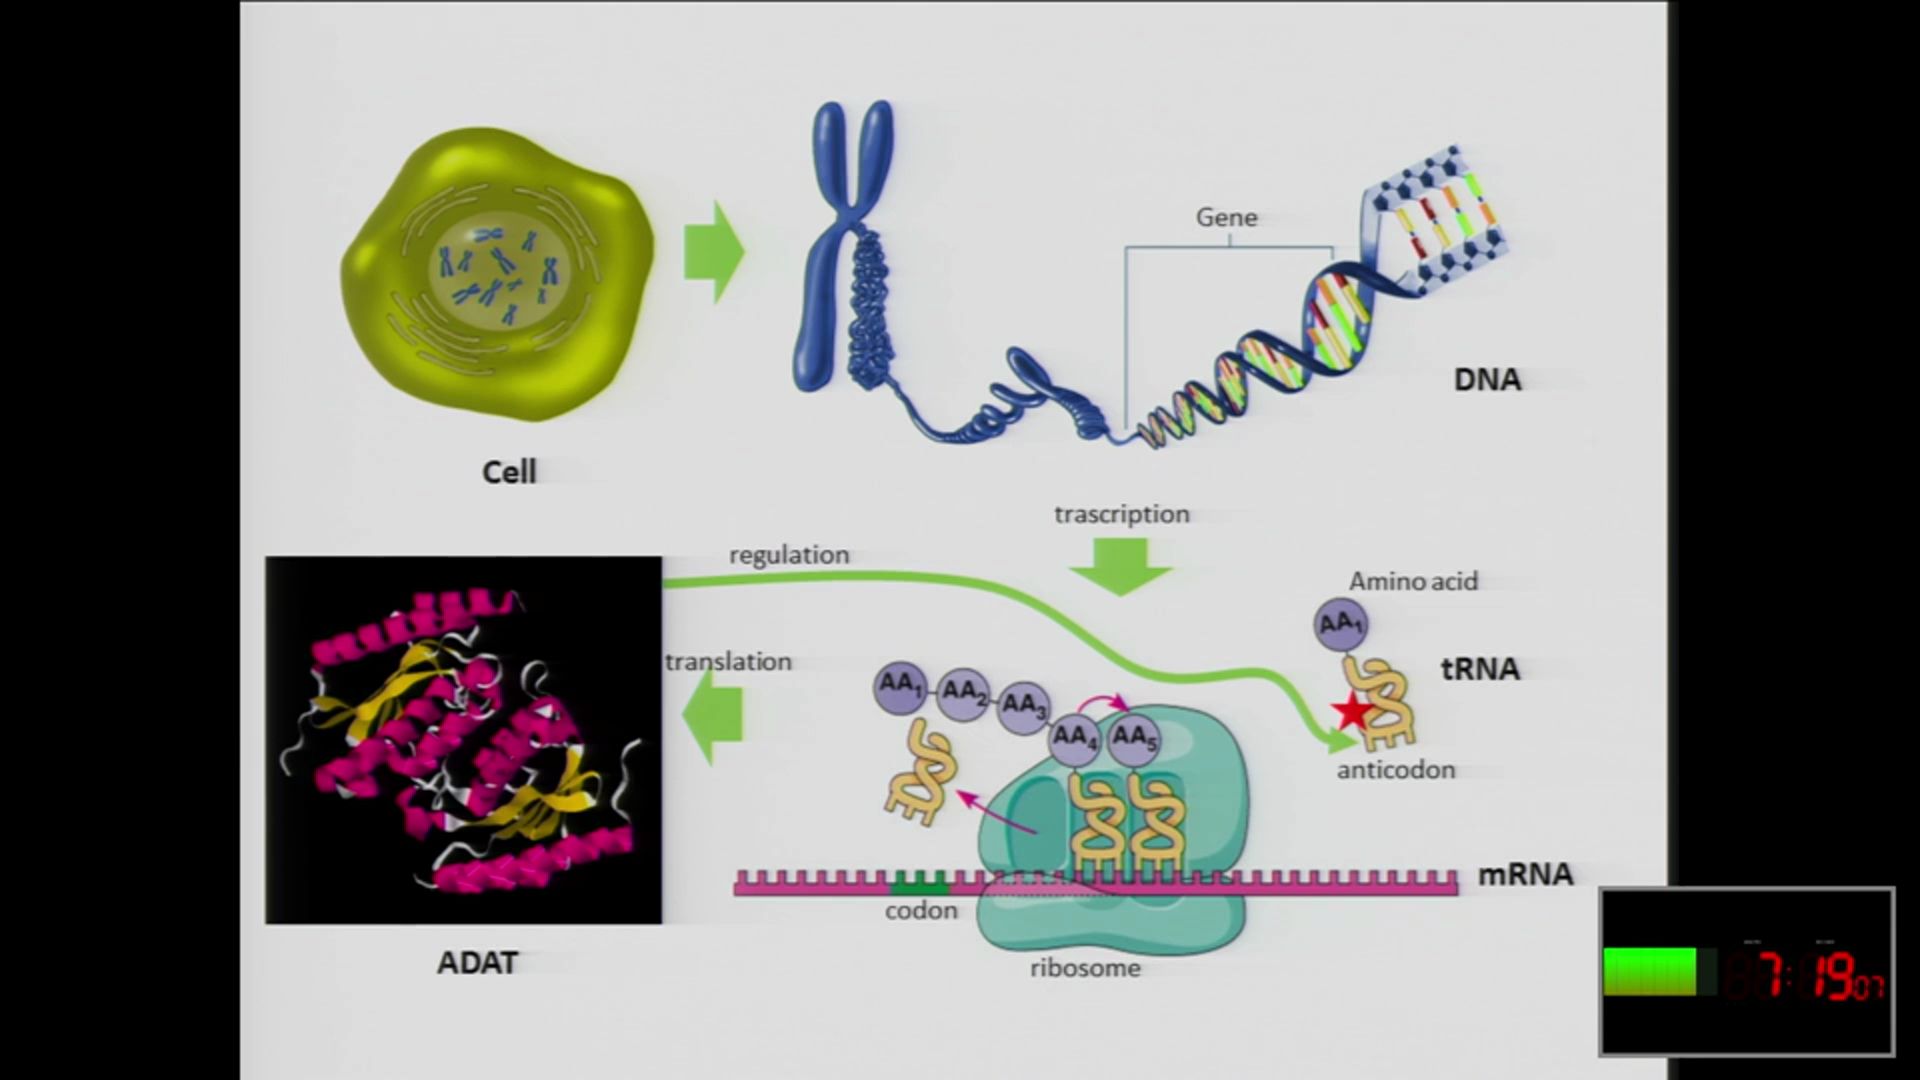 ADAT: a promising target for protein synthesis regulation